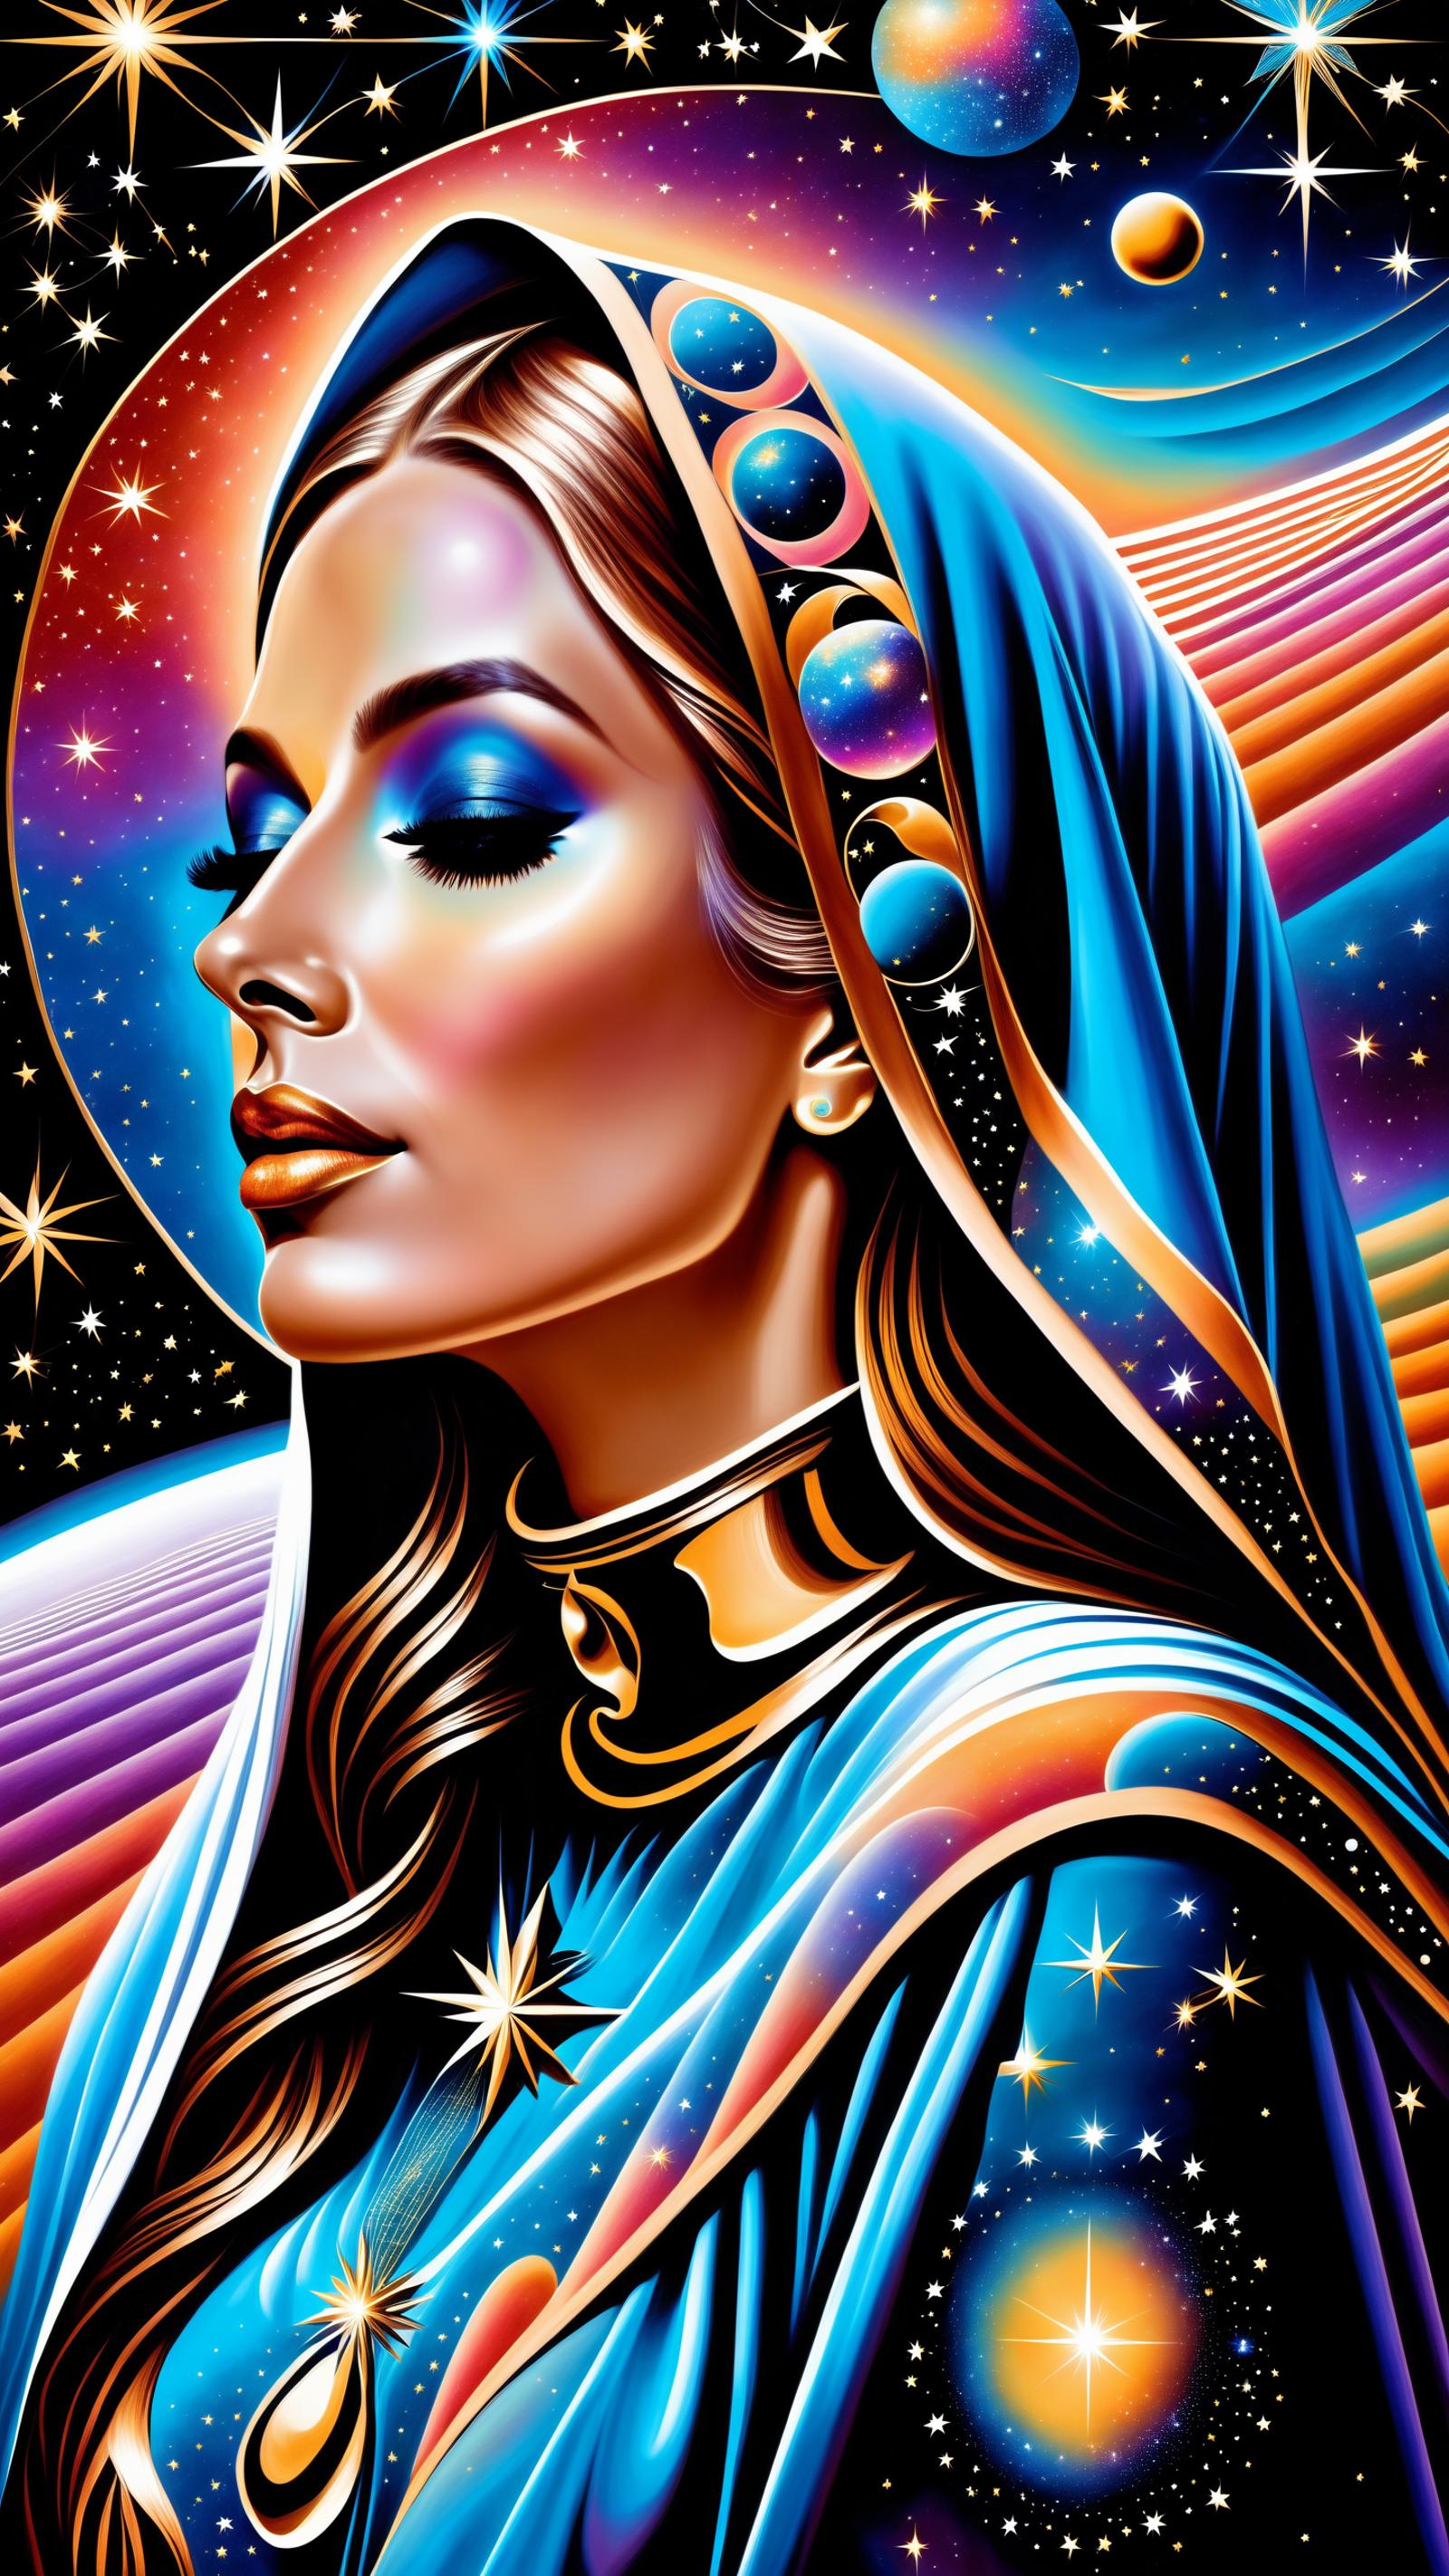 A digital painting of a woman wearing a blue head dress, necklace, and earrings.